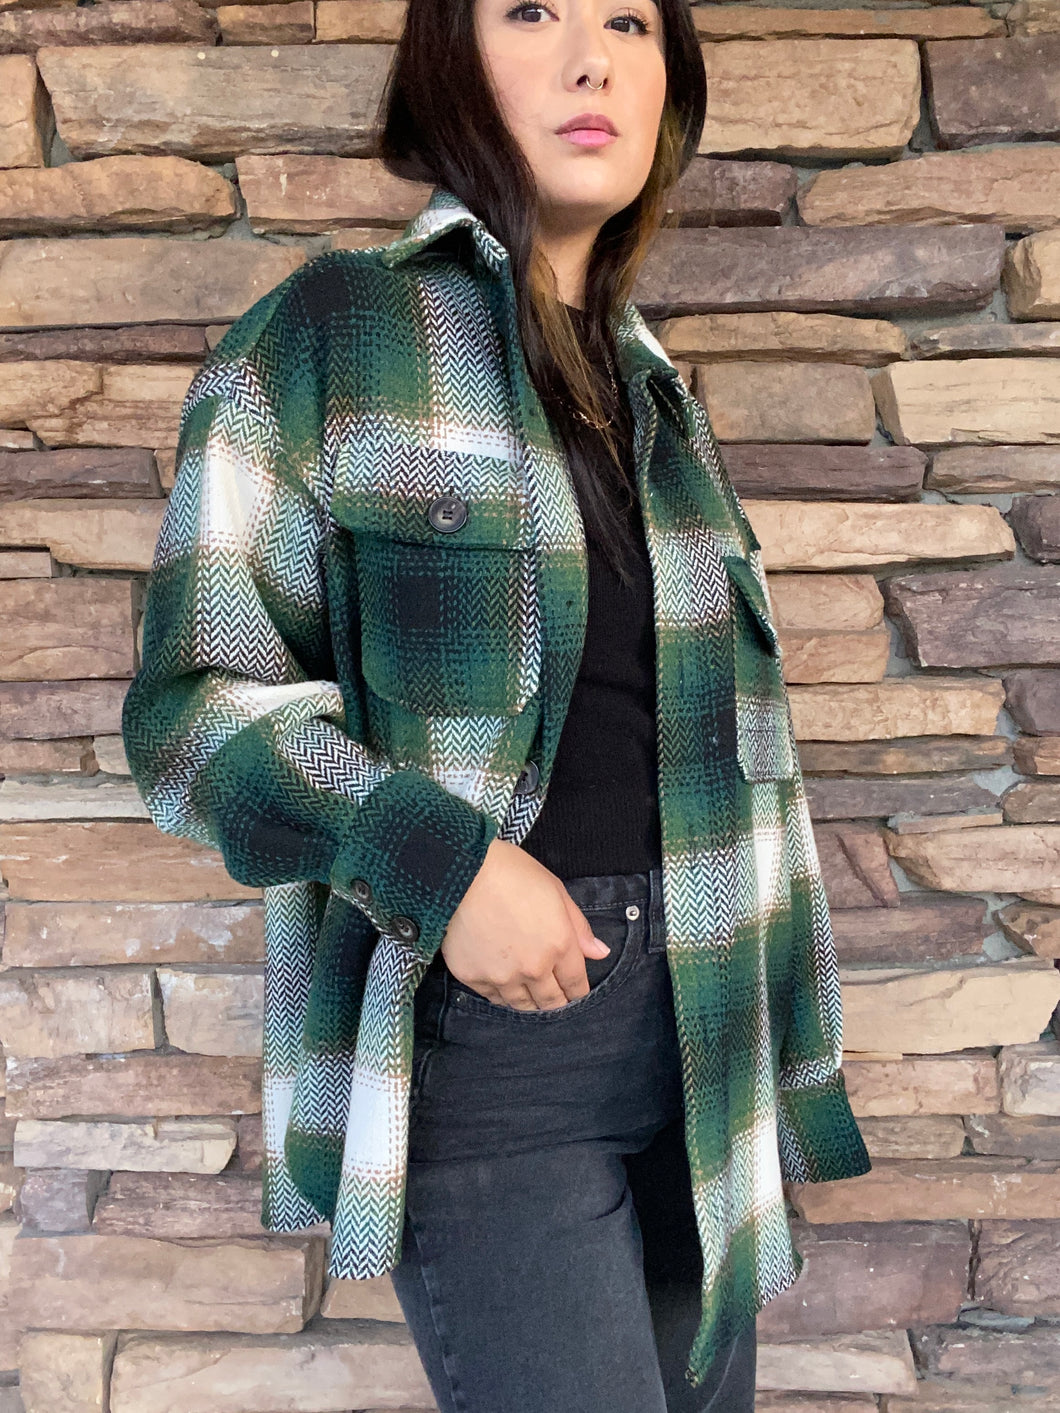 Your BF's Plaid Jacket